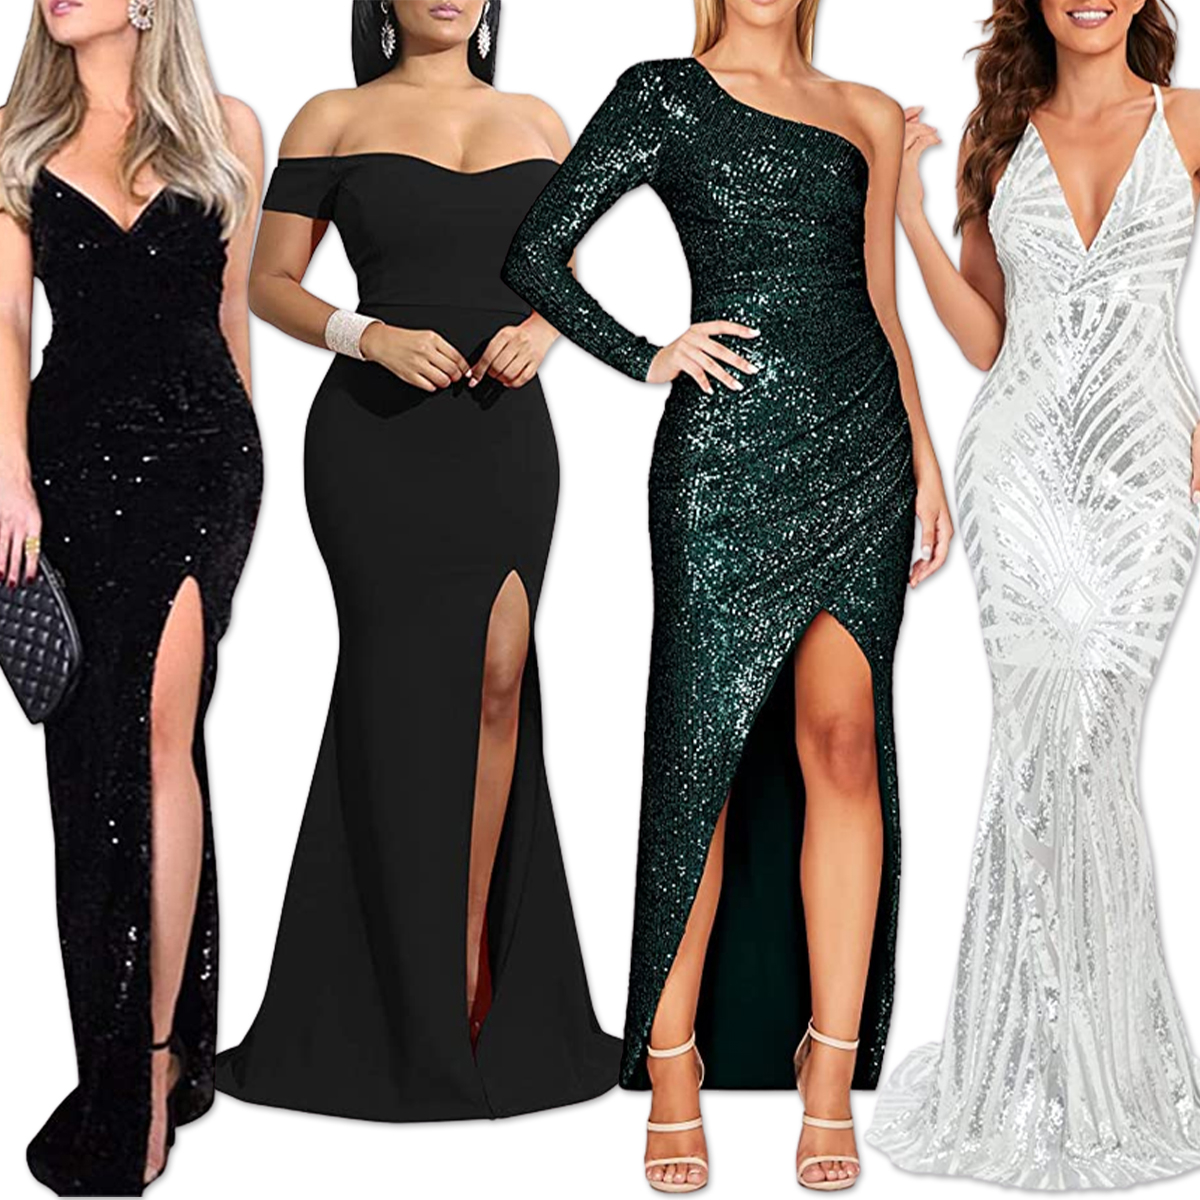 Prom Dresses Under $100: 23 On-Trend Styles Worthy of a Viral Moment